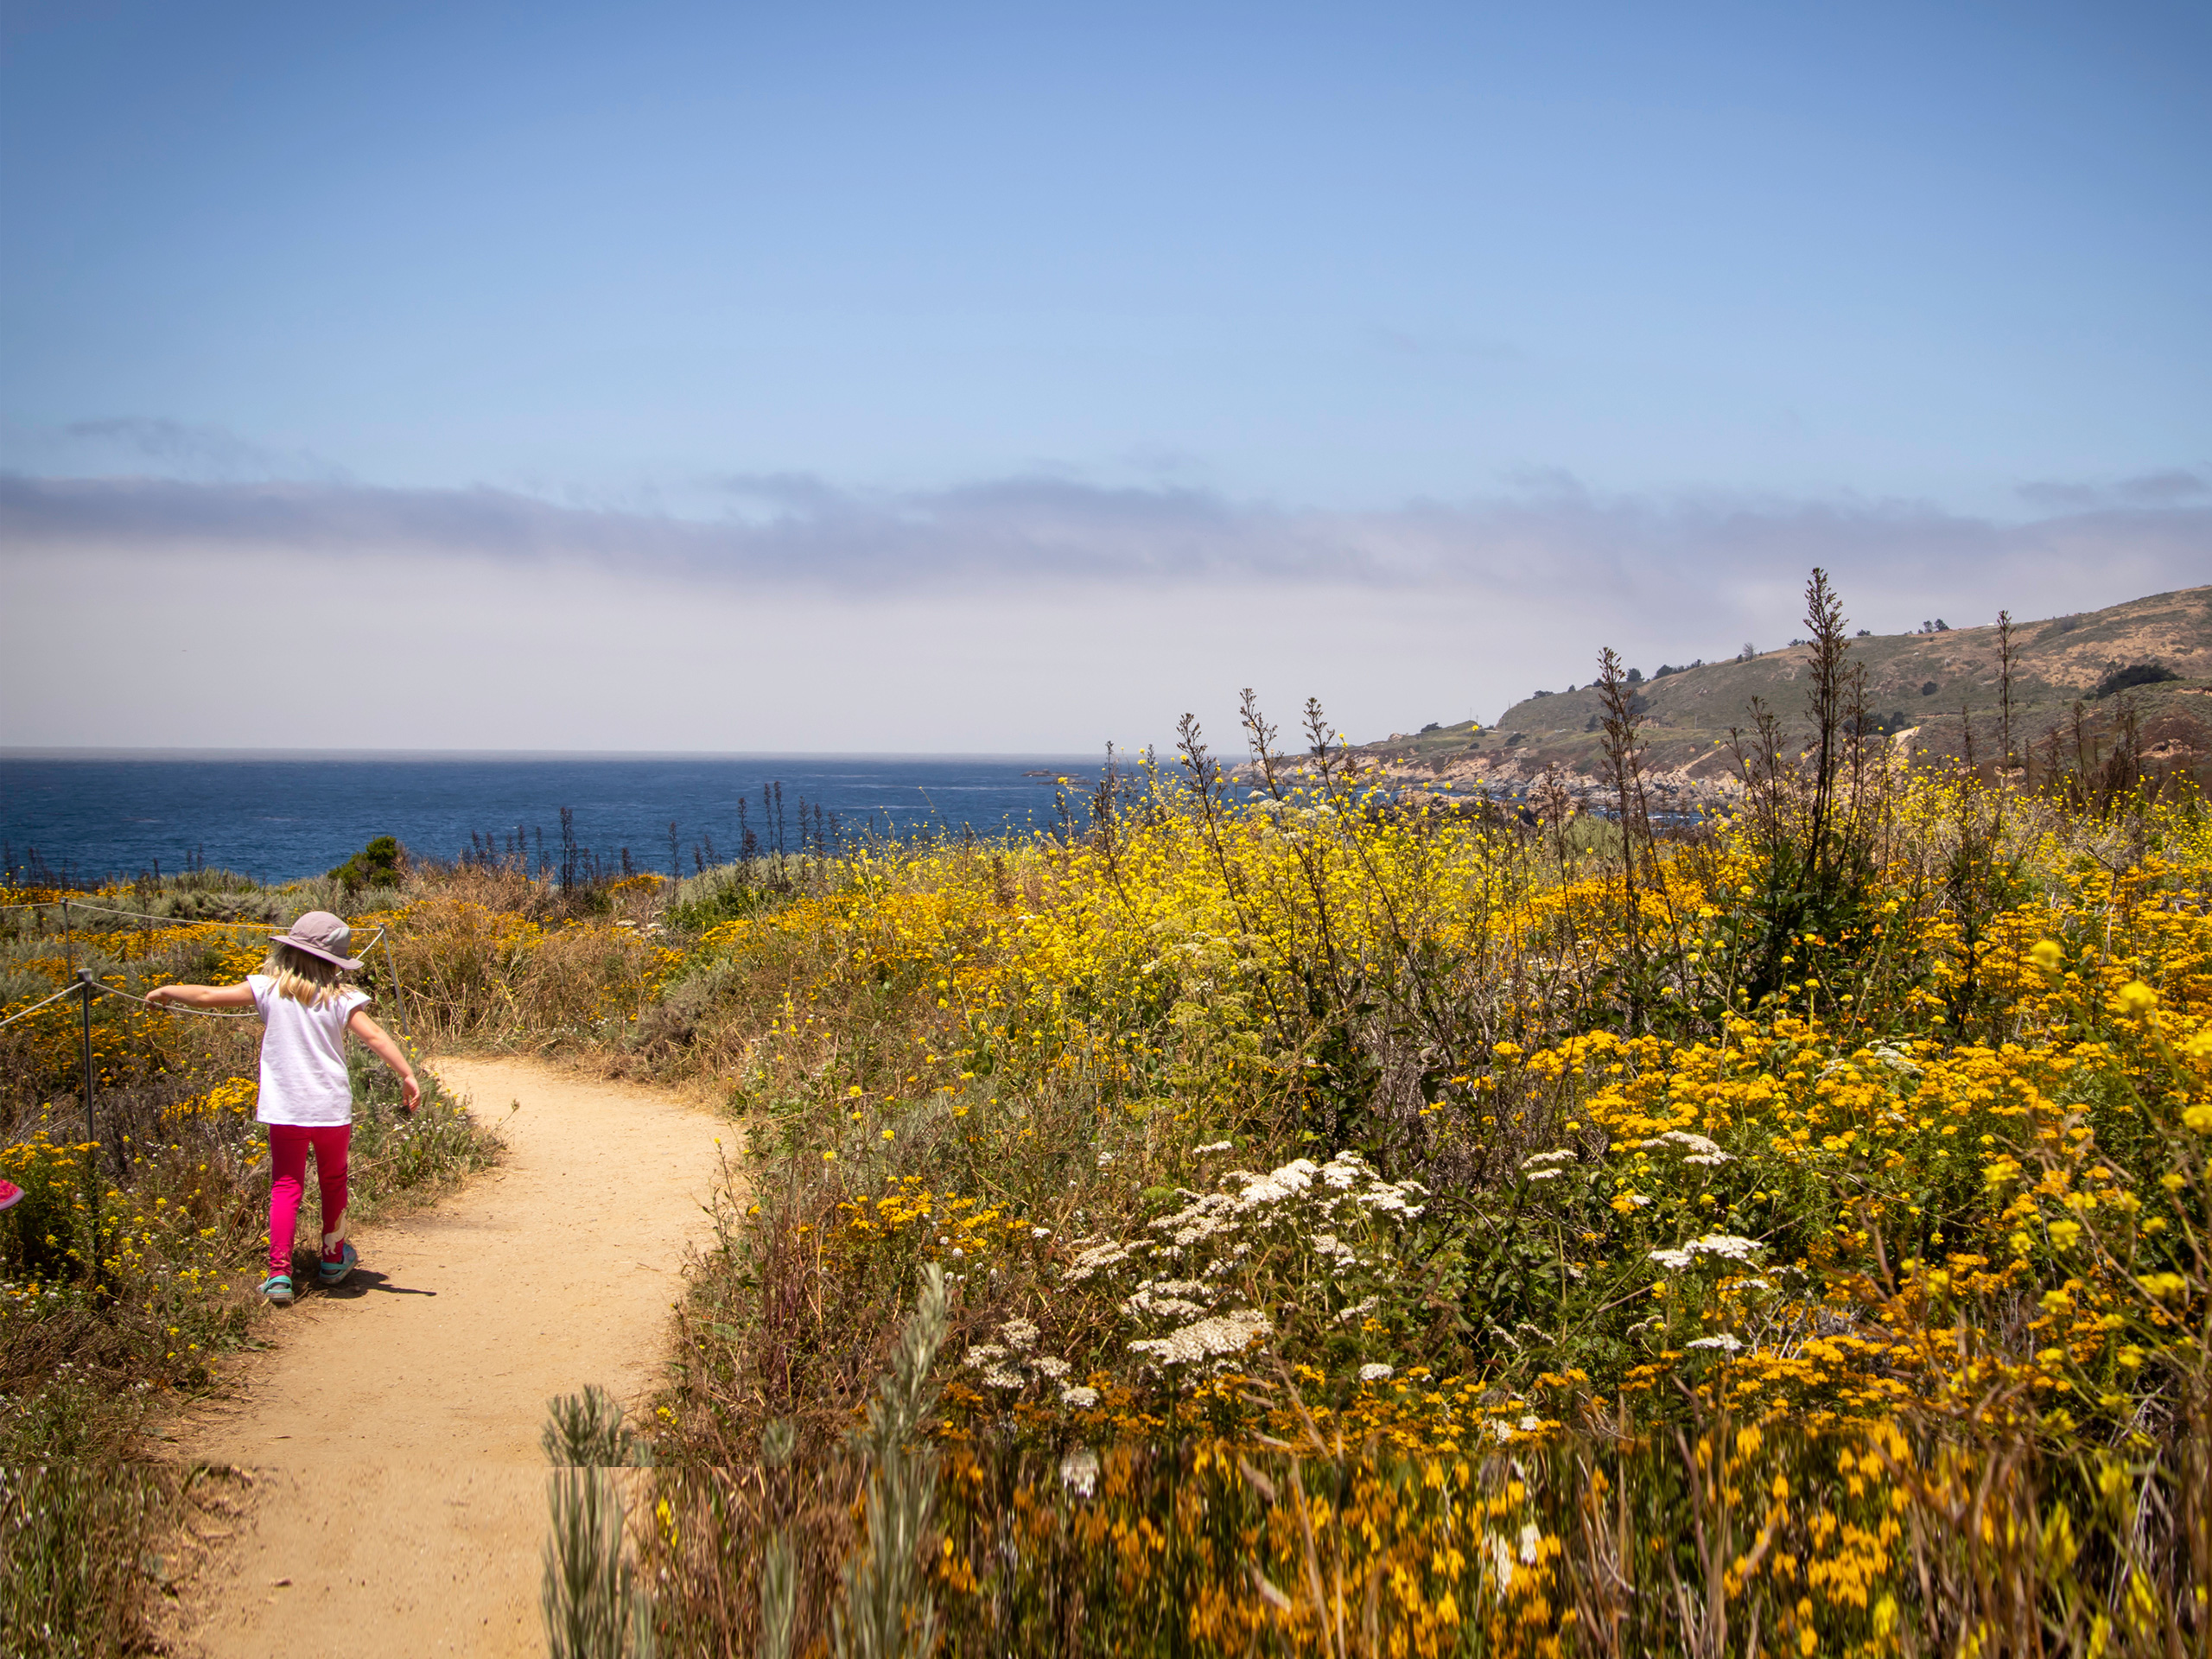 A little girl walks on a trail surrounded by yellow wildflowers at Garrapata State Park in Monterey, California; Courtesy of RS Smith Photography/Shutterstock